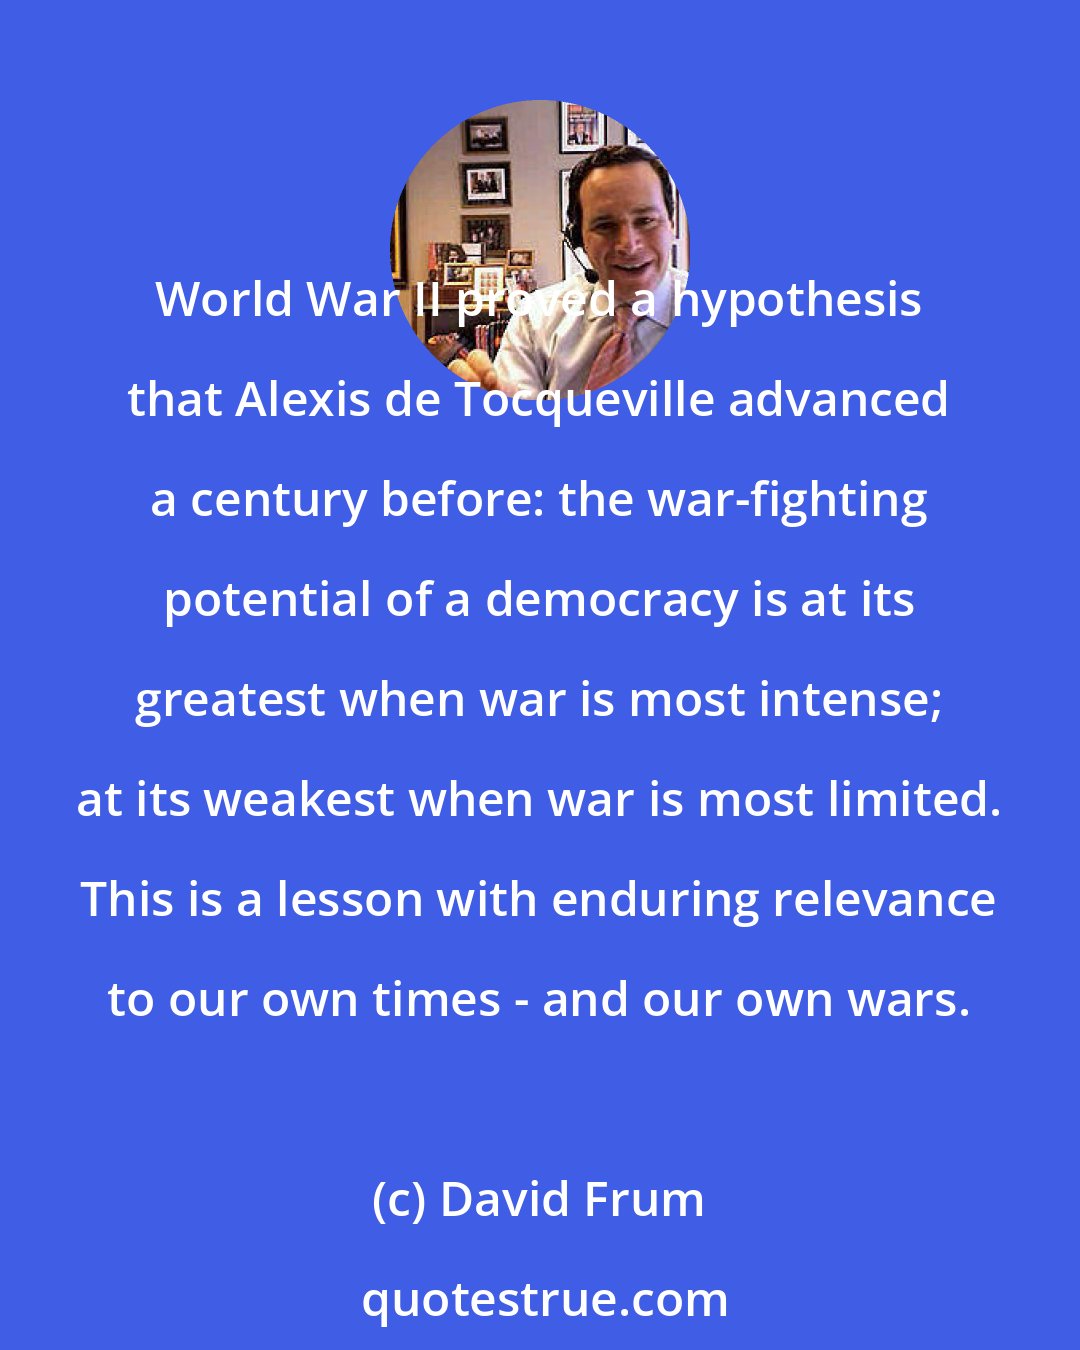 David Frum: World War II proved a hypothesis that Alexis de Tocqueville advanced a century before: the war-fighting potential of a democracy is at its greatest when war is most intense; at its weakest when war is most limited. This is a lesson with enduring relevance to our own times - and our own wars.